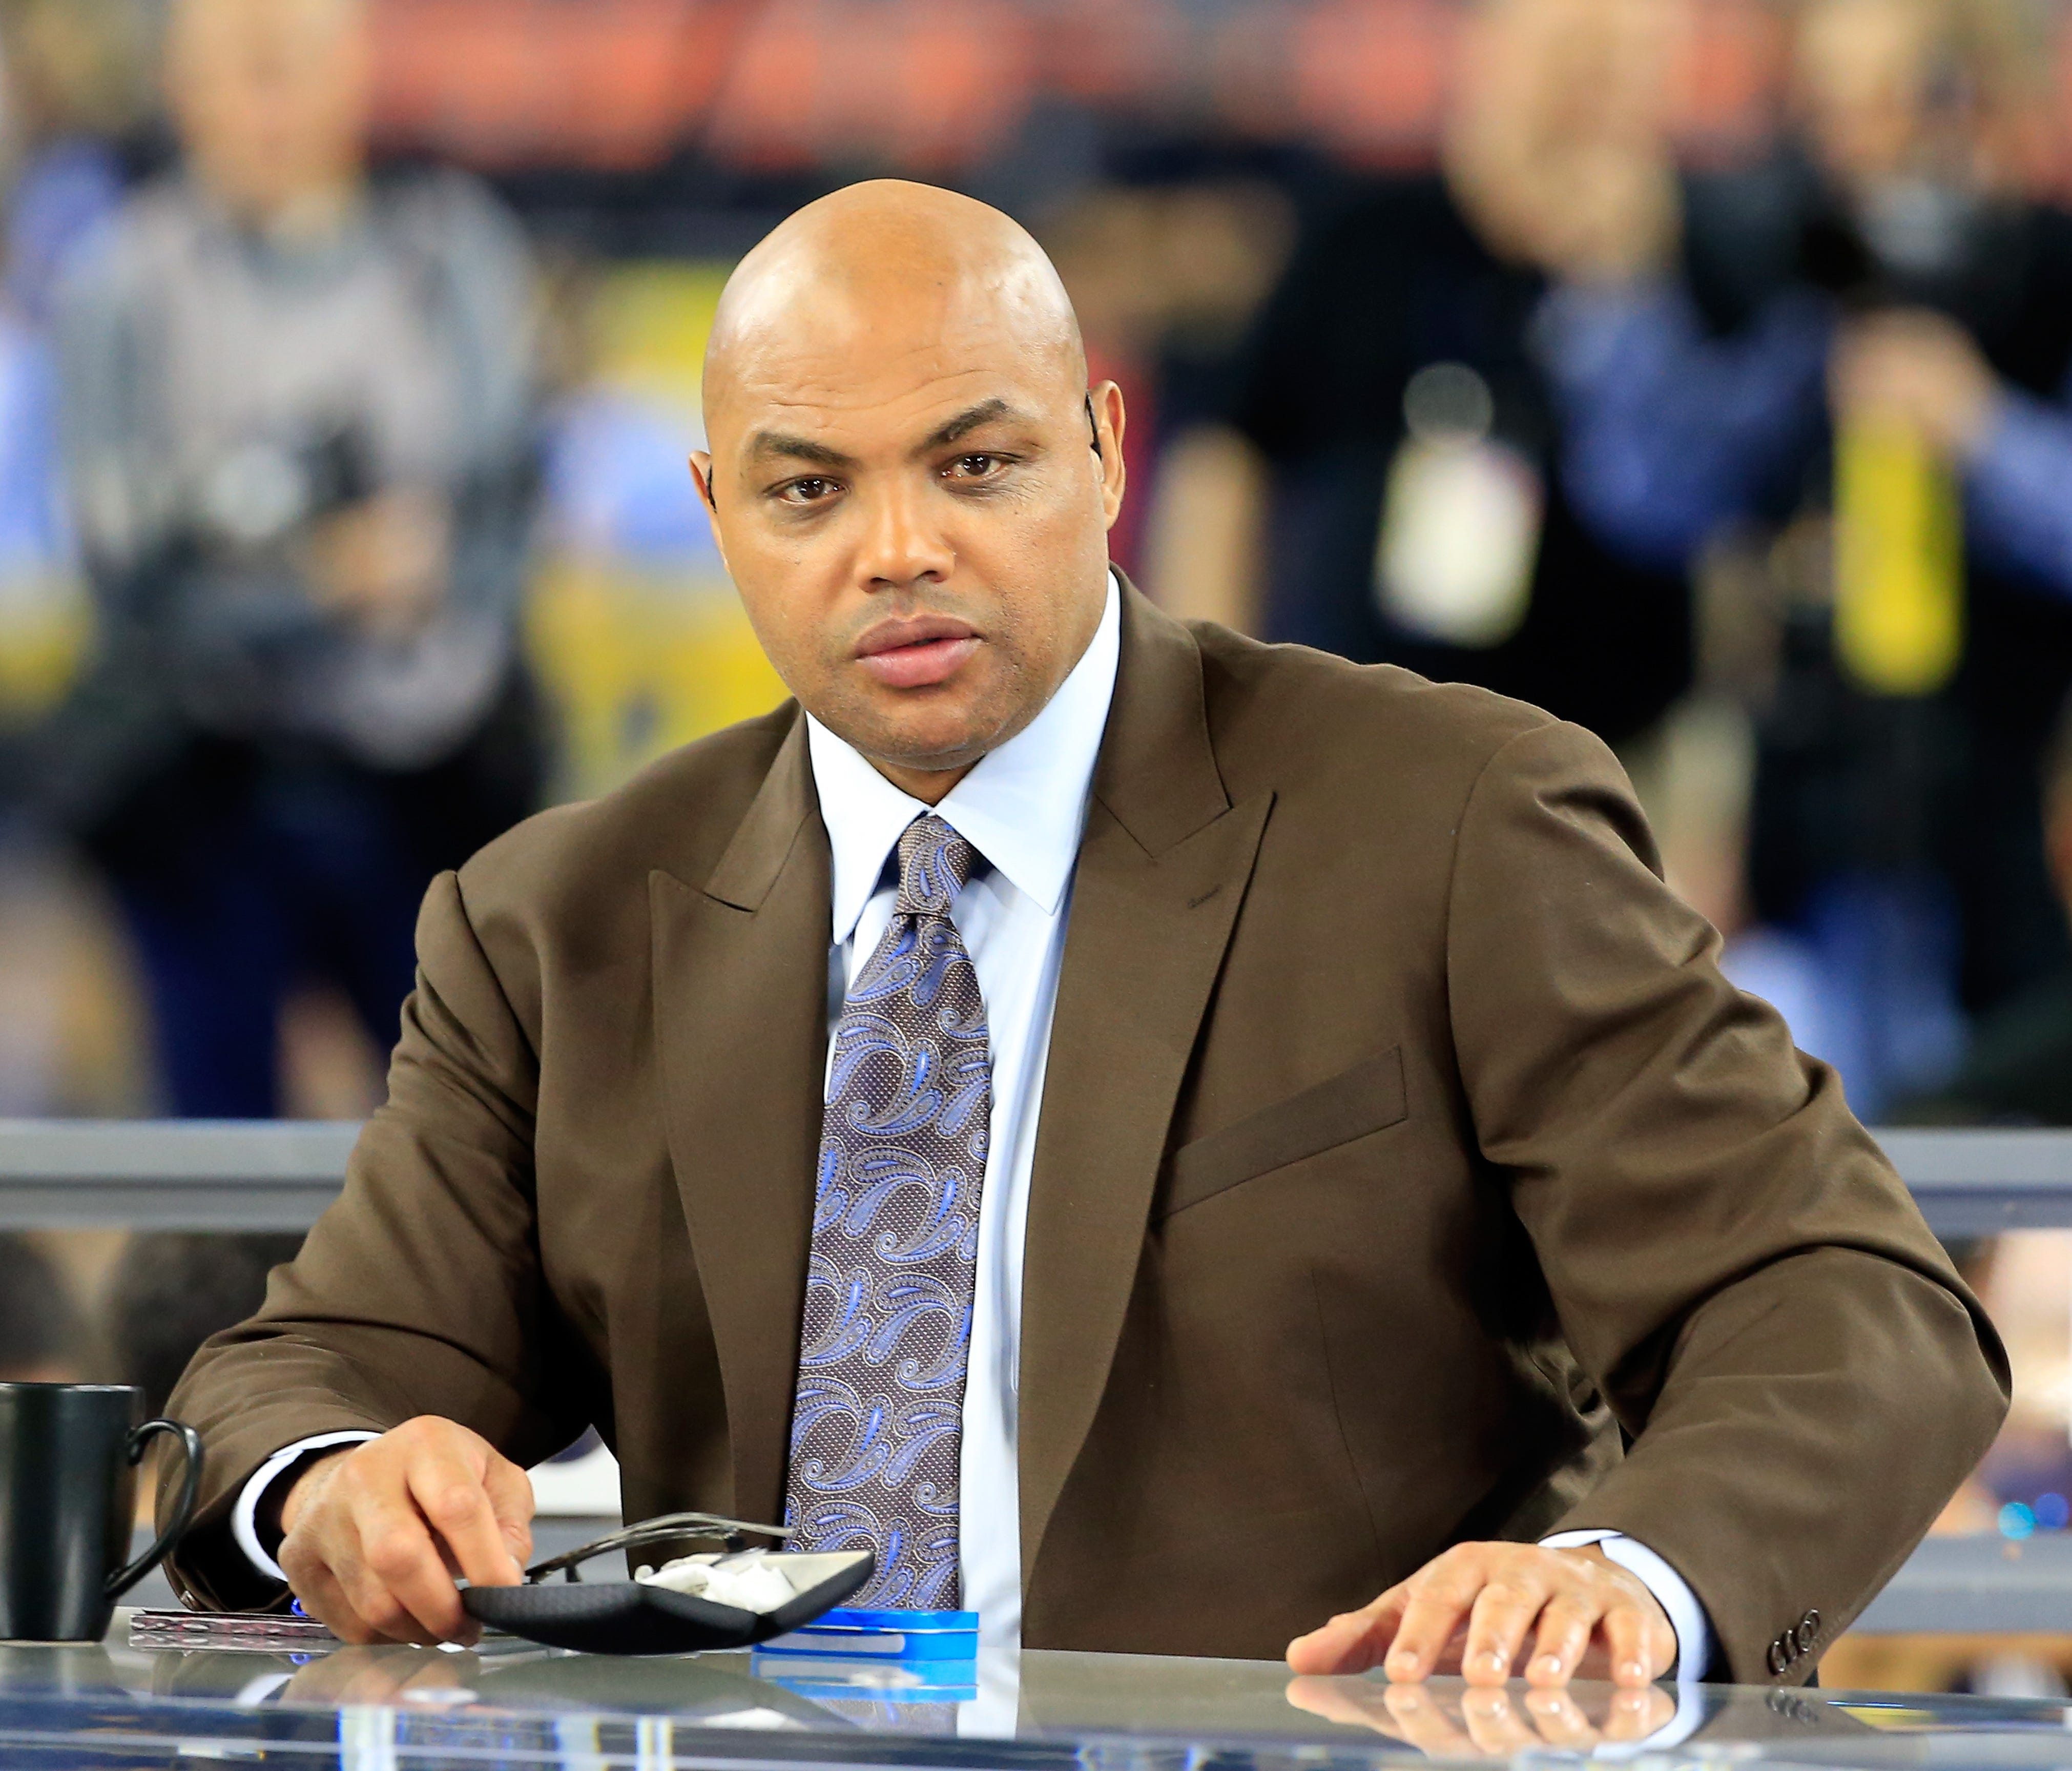 Former NBA player and commentator Charles Barkley looks on prior to the 2016 NCAA Men's Final Four National Championship game.